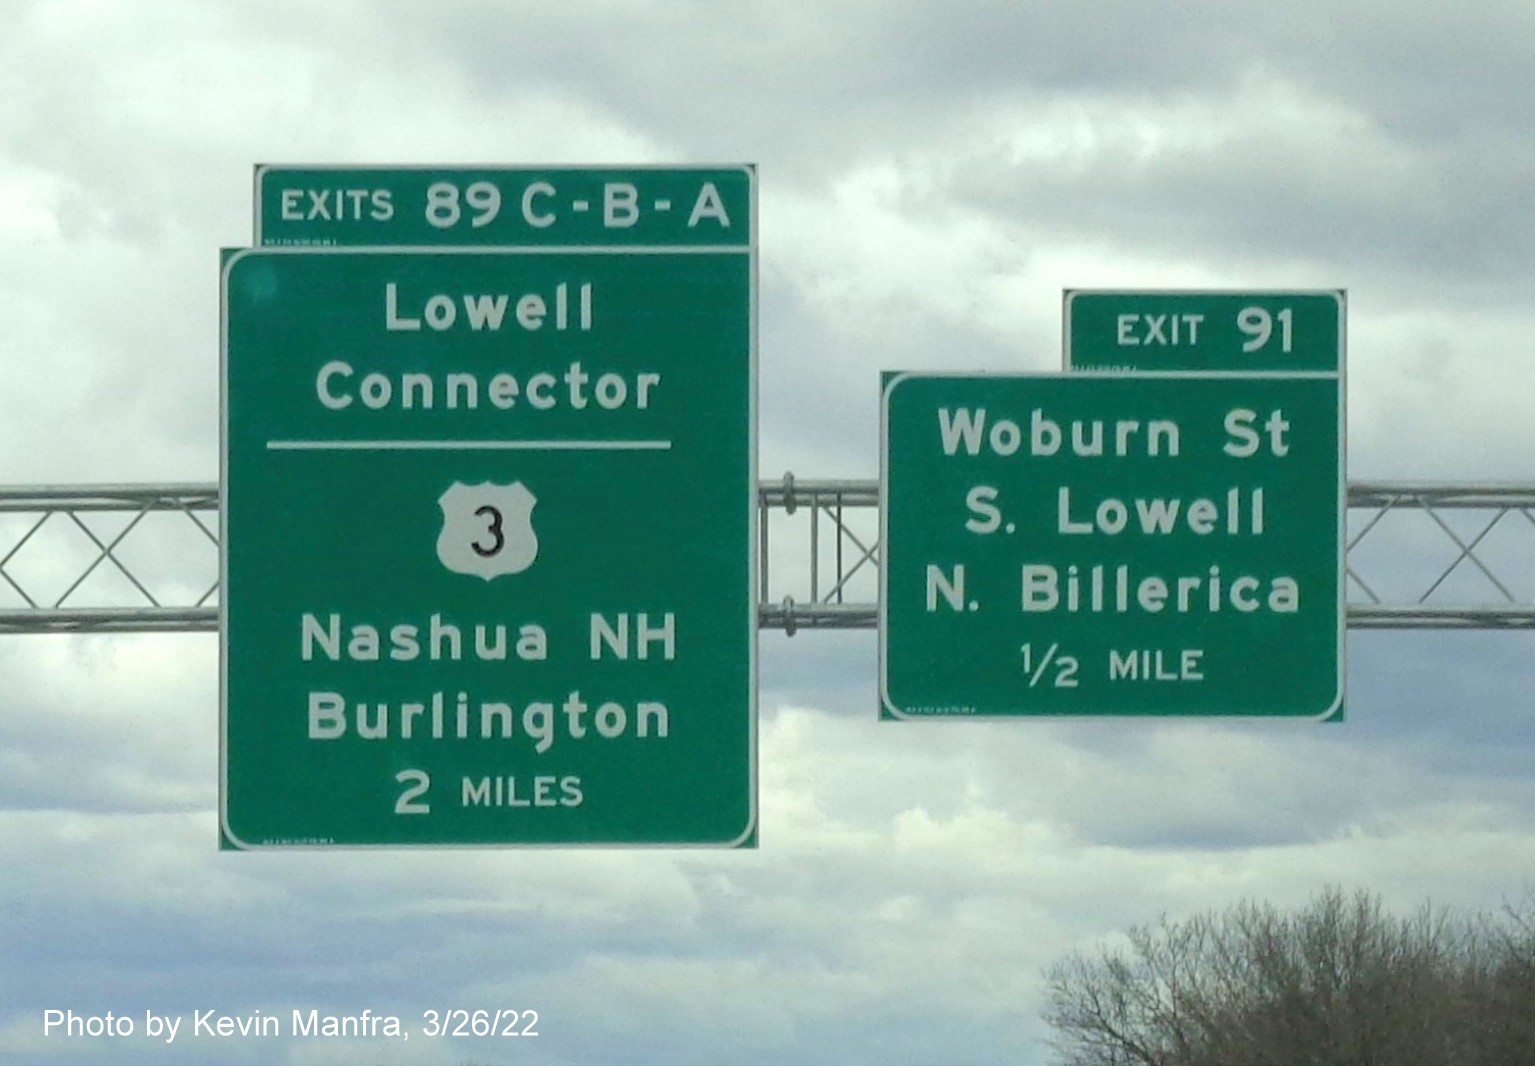 Image of recently placed new 2 miles advance overhead sign for Lowell Connector/US 3 exits and 1/2 mile advance
         for Woburn Street on I-495 South in Chelmsford, by Kevin Manfra, March 2022